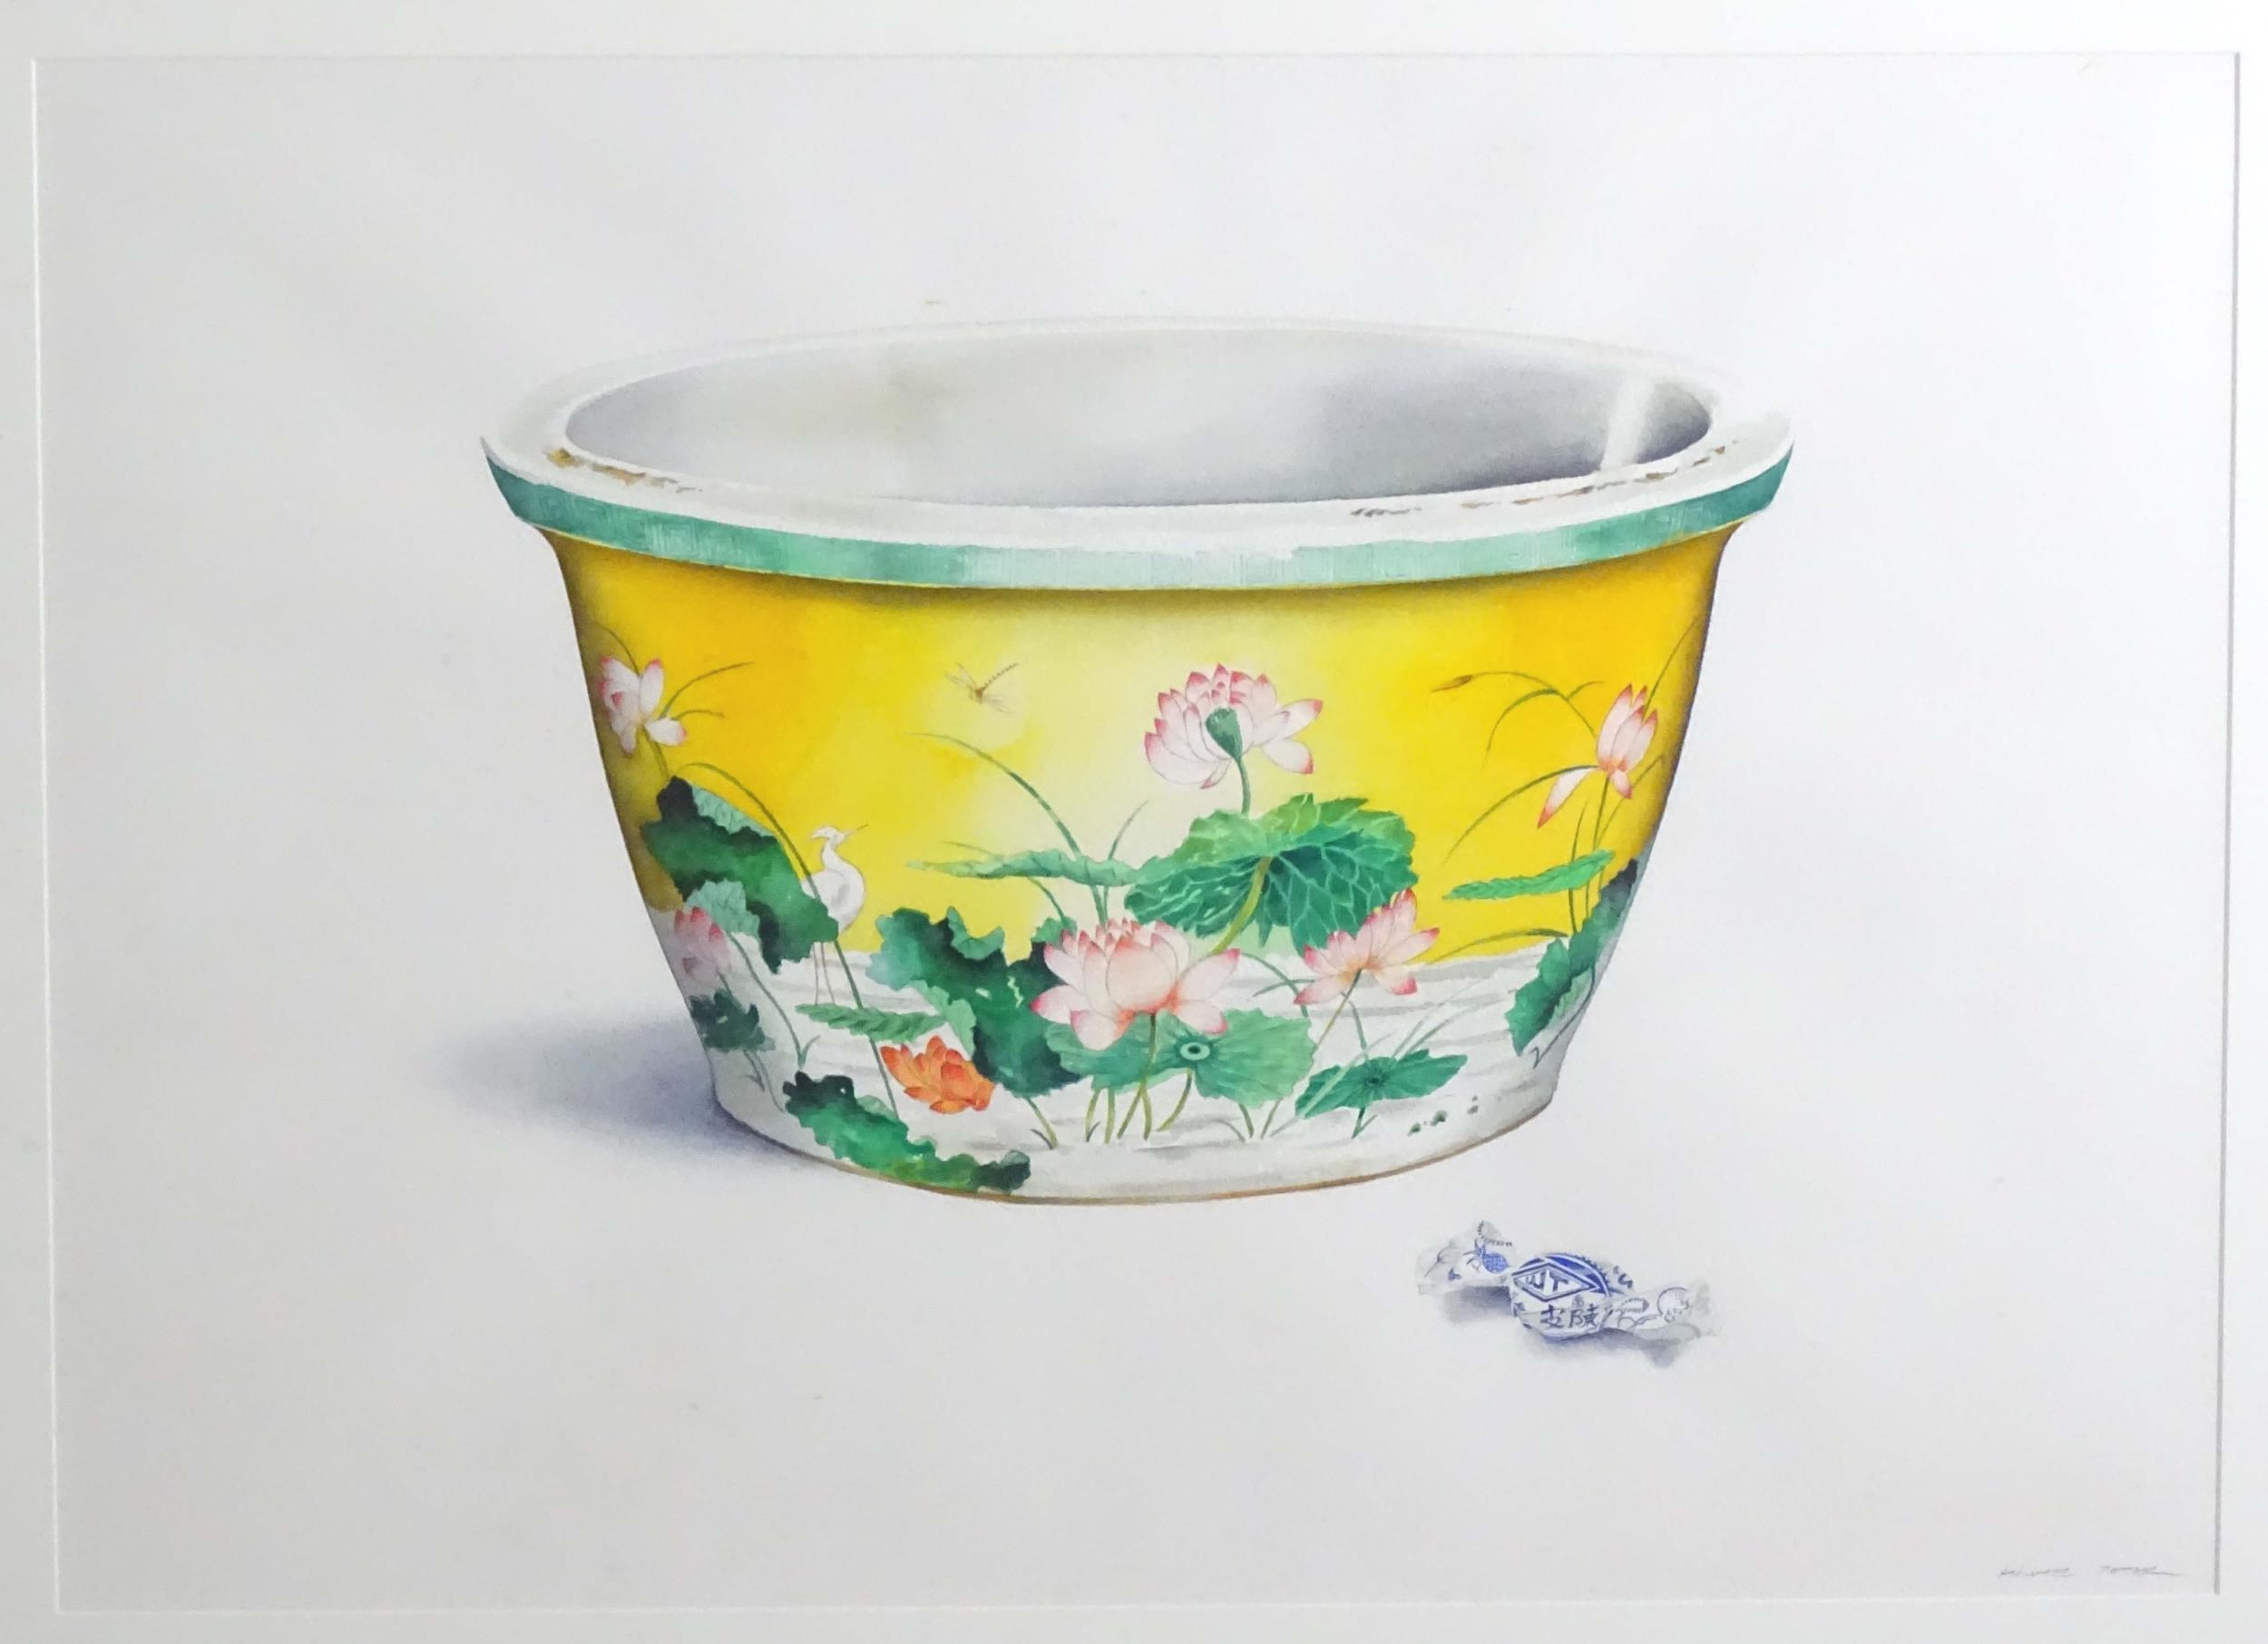 Michael Potter, 20th century, Watercolour, A study of a Chinese planter / jardiniere decorated - Image 3 of 5